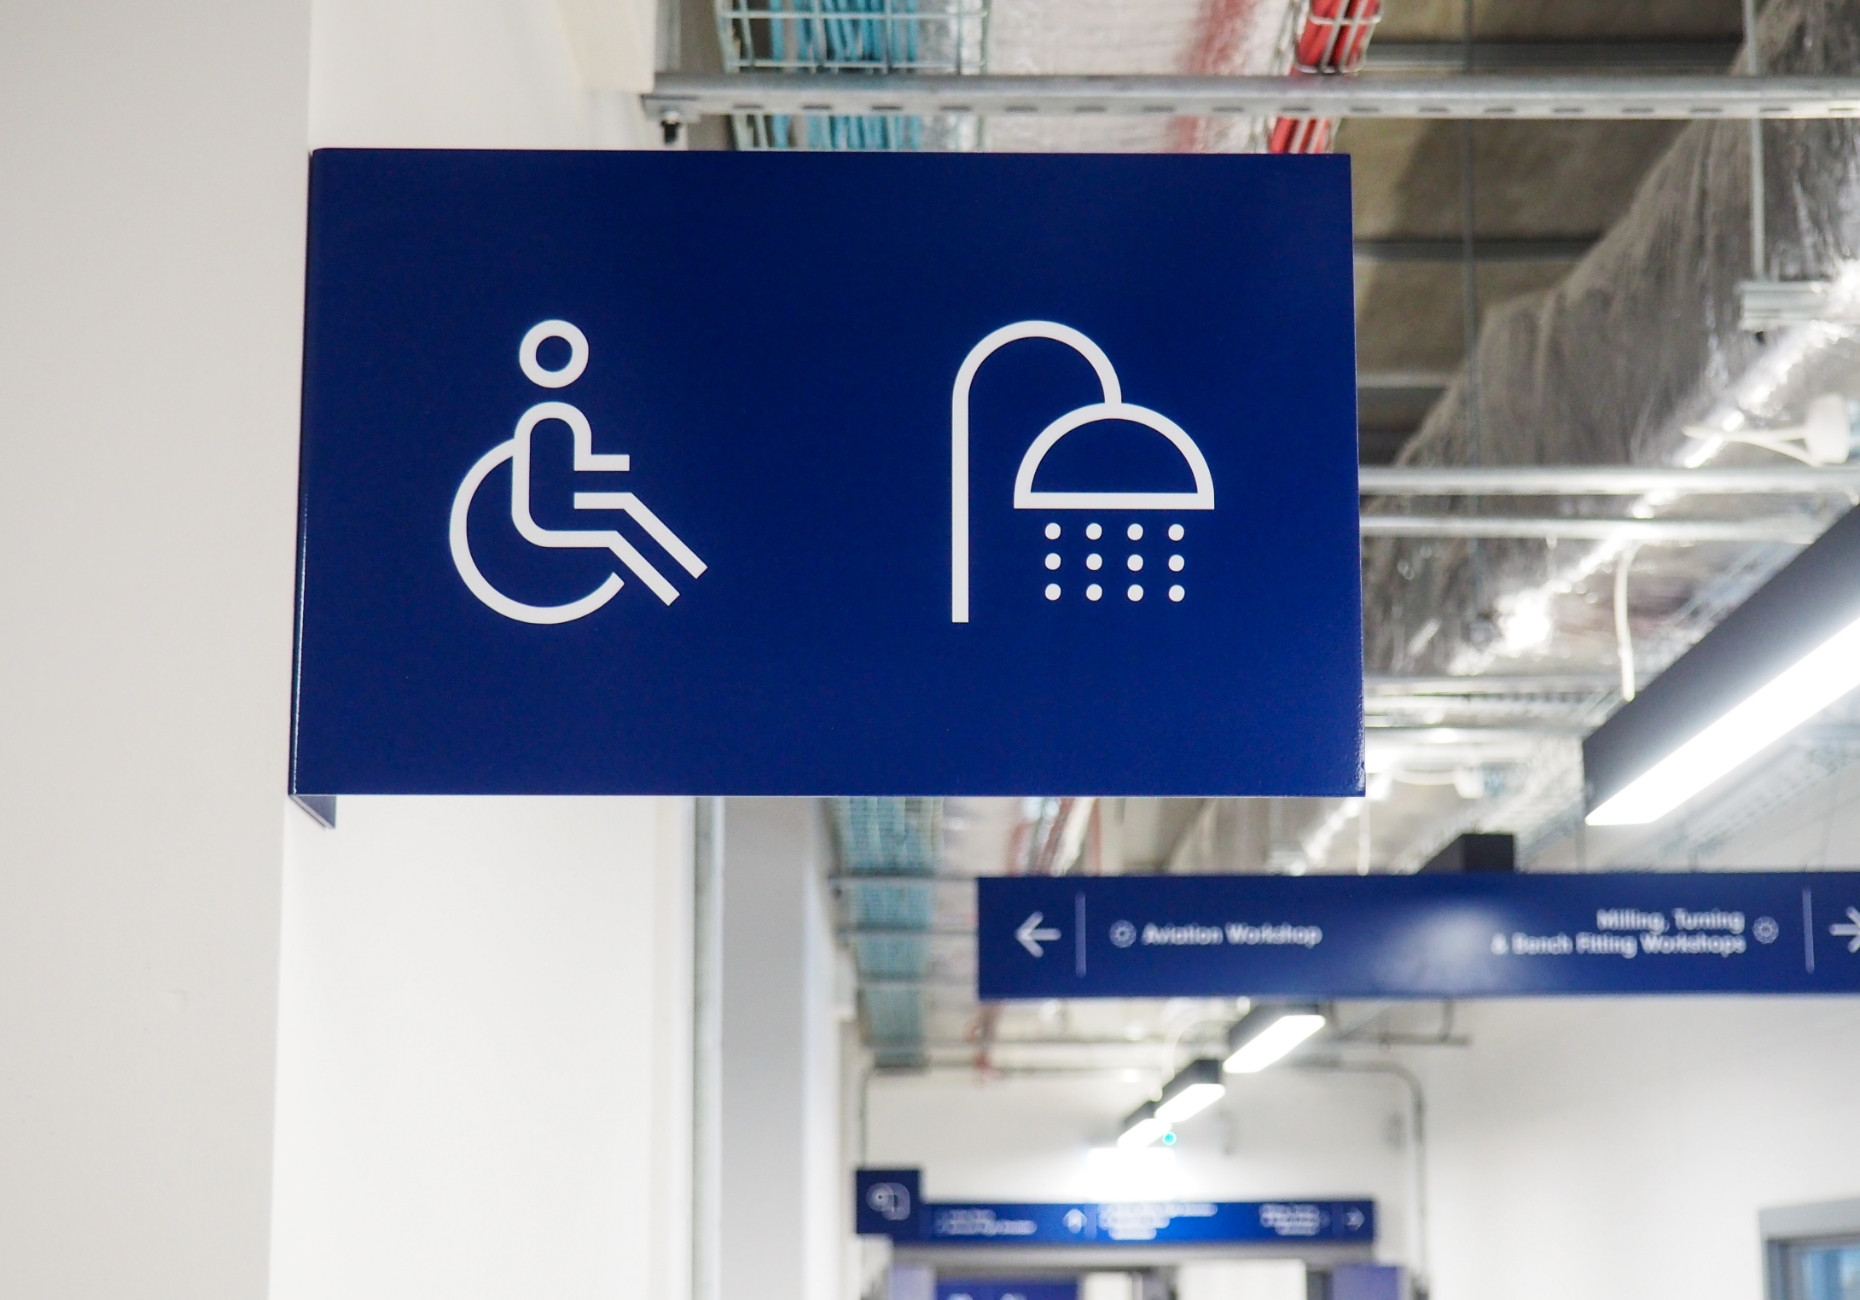 ASI college wayfinding overhead toilet shower icon sign design